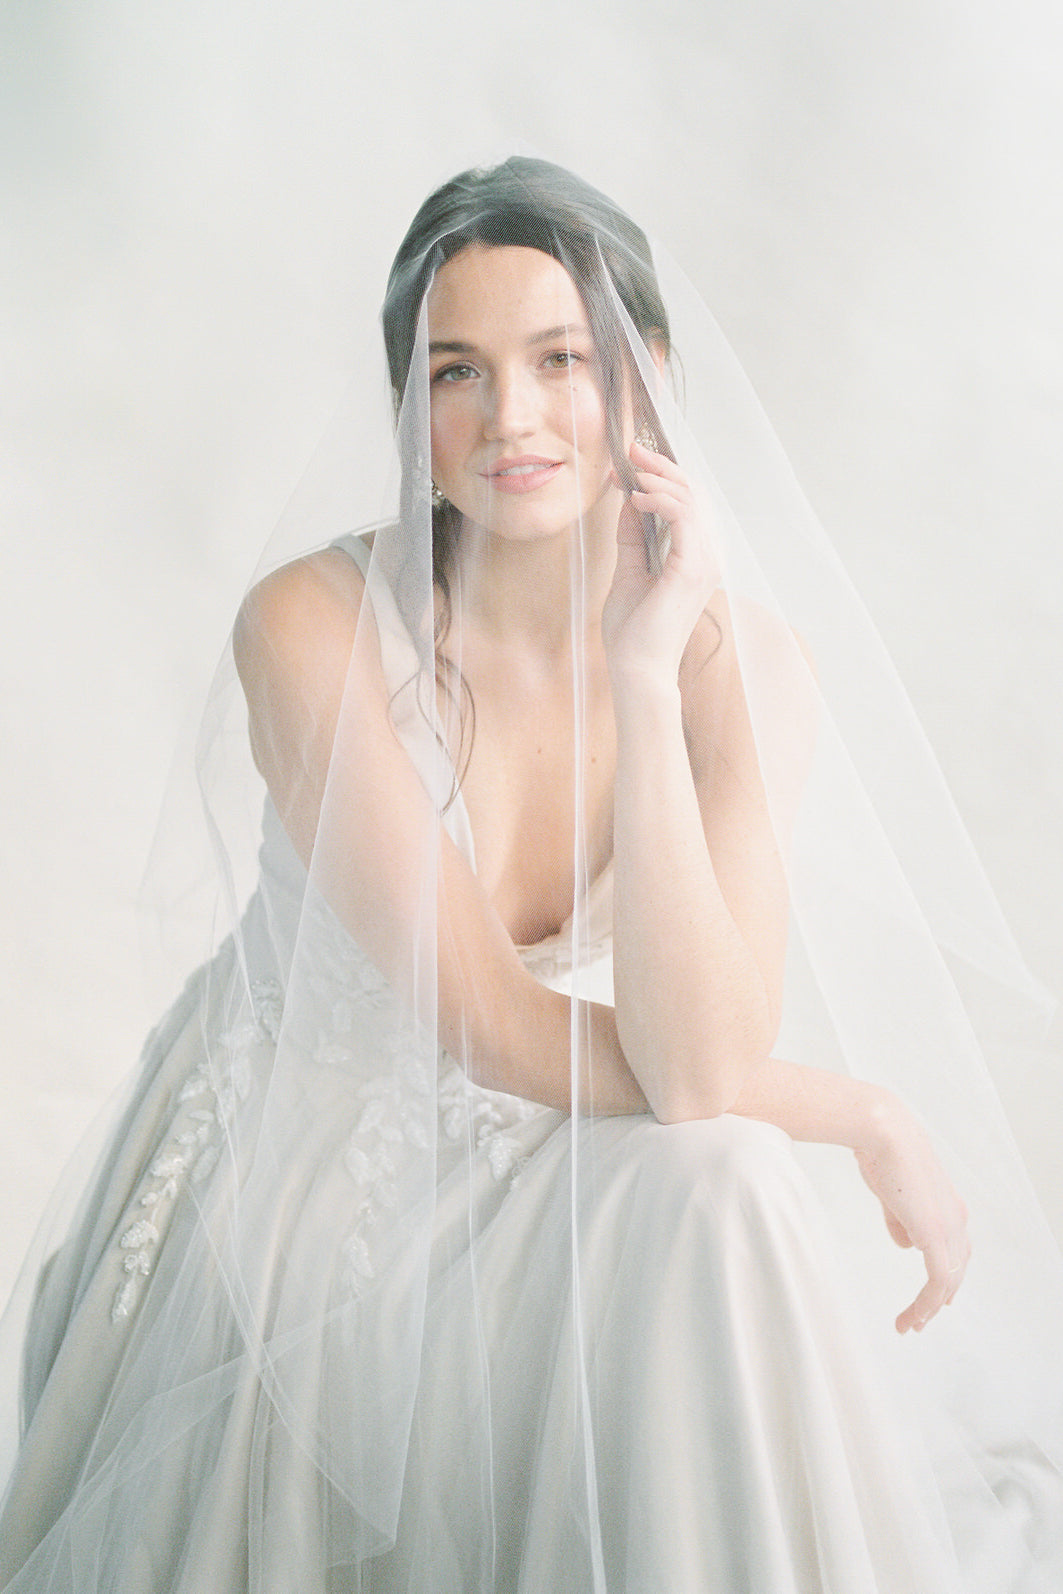 One Blushing Bride Two Tier Drop Wedding Veil, Long Veil with Blusher, Double Layer Ivory / Fingertip 35-40 Inches